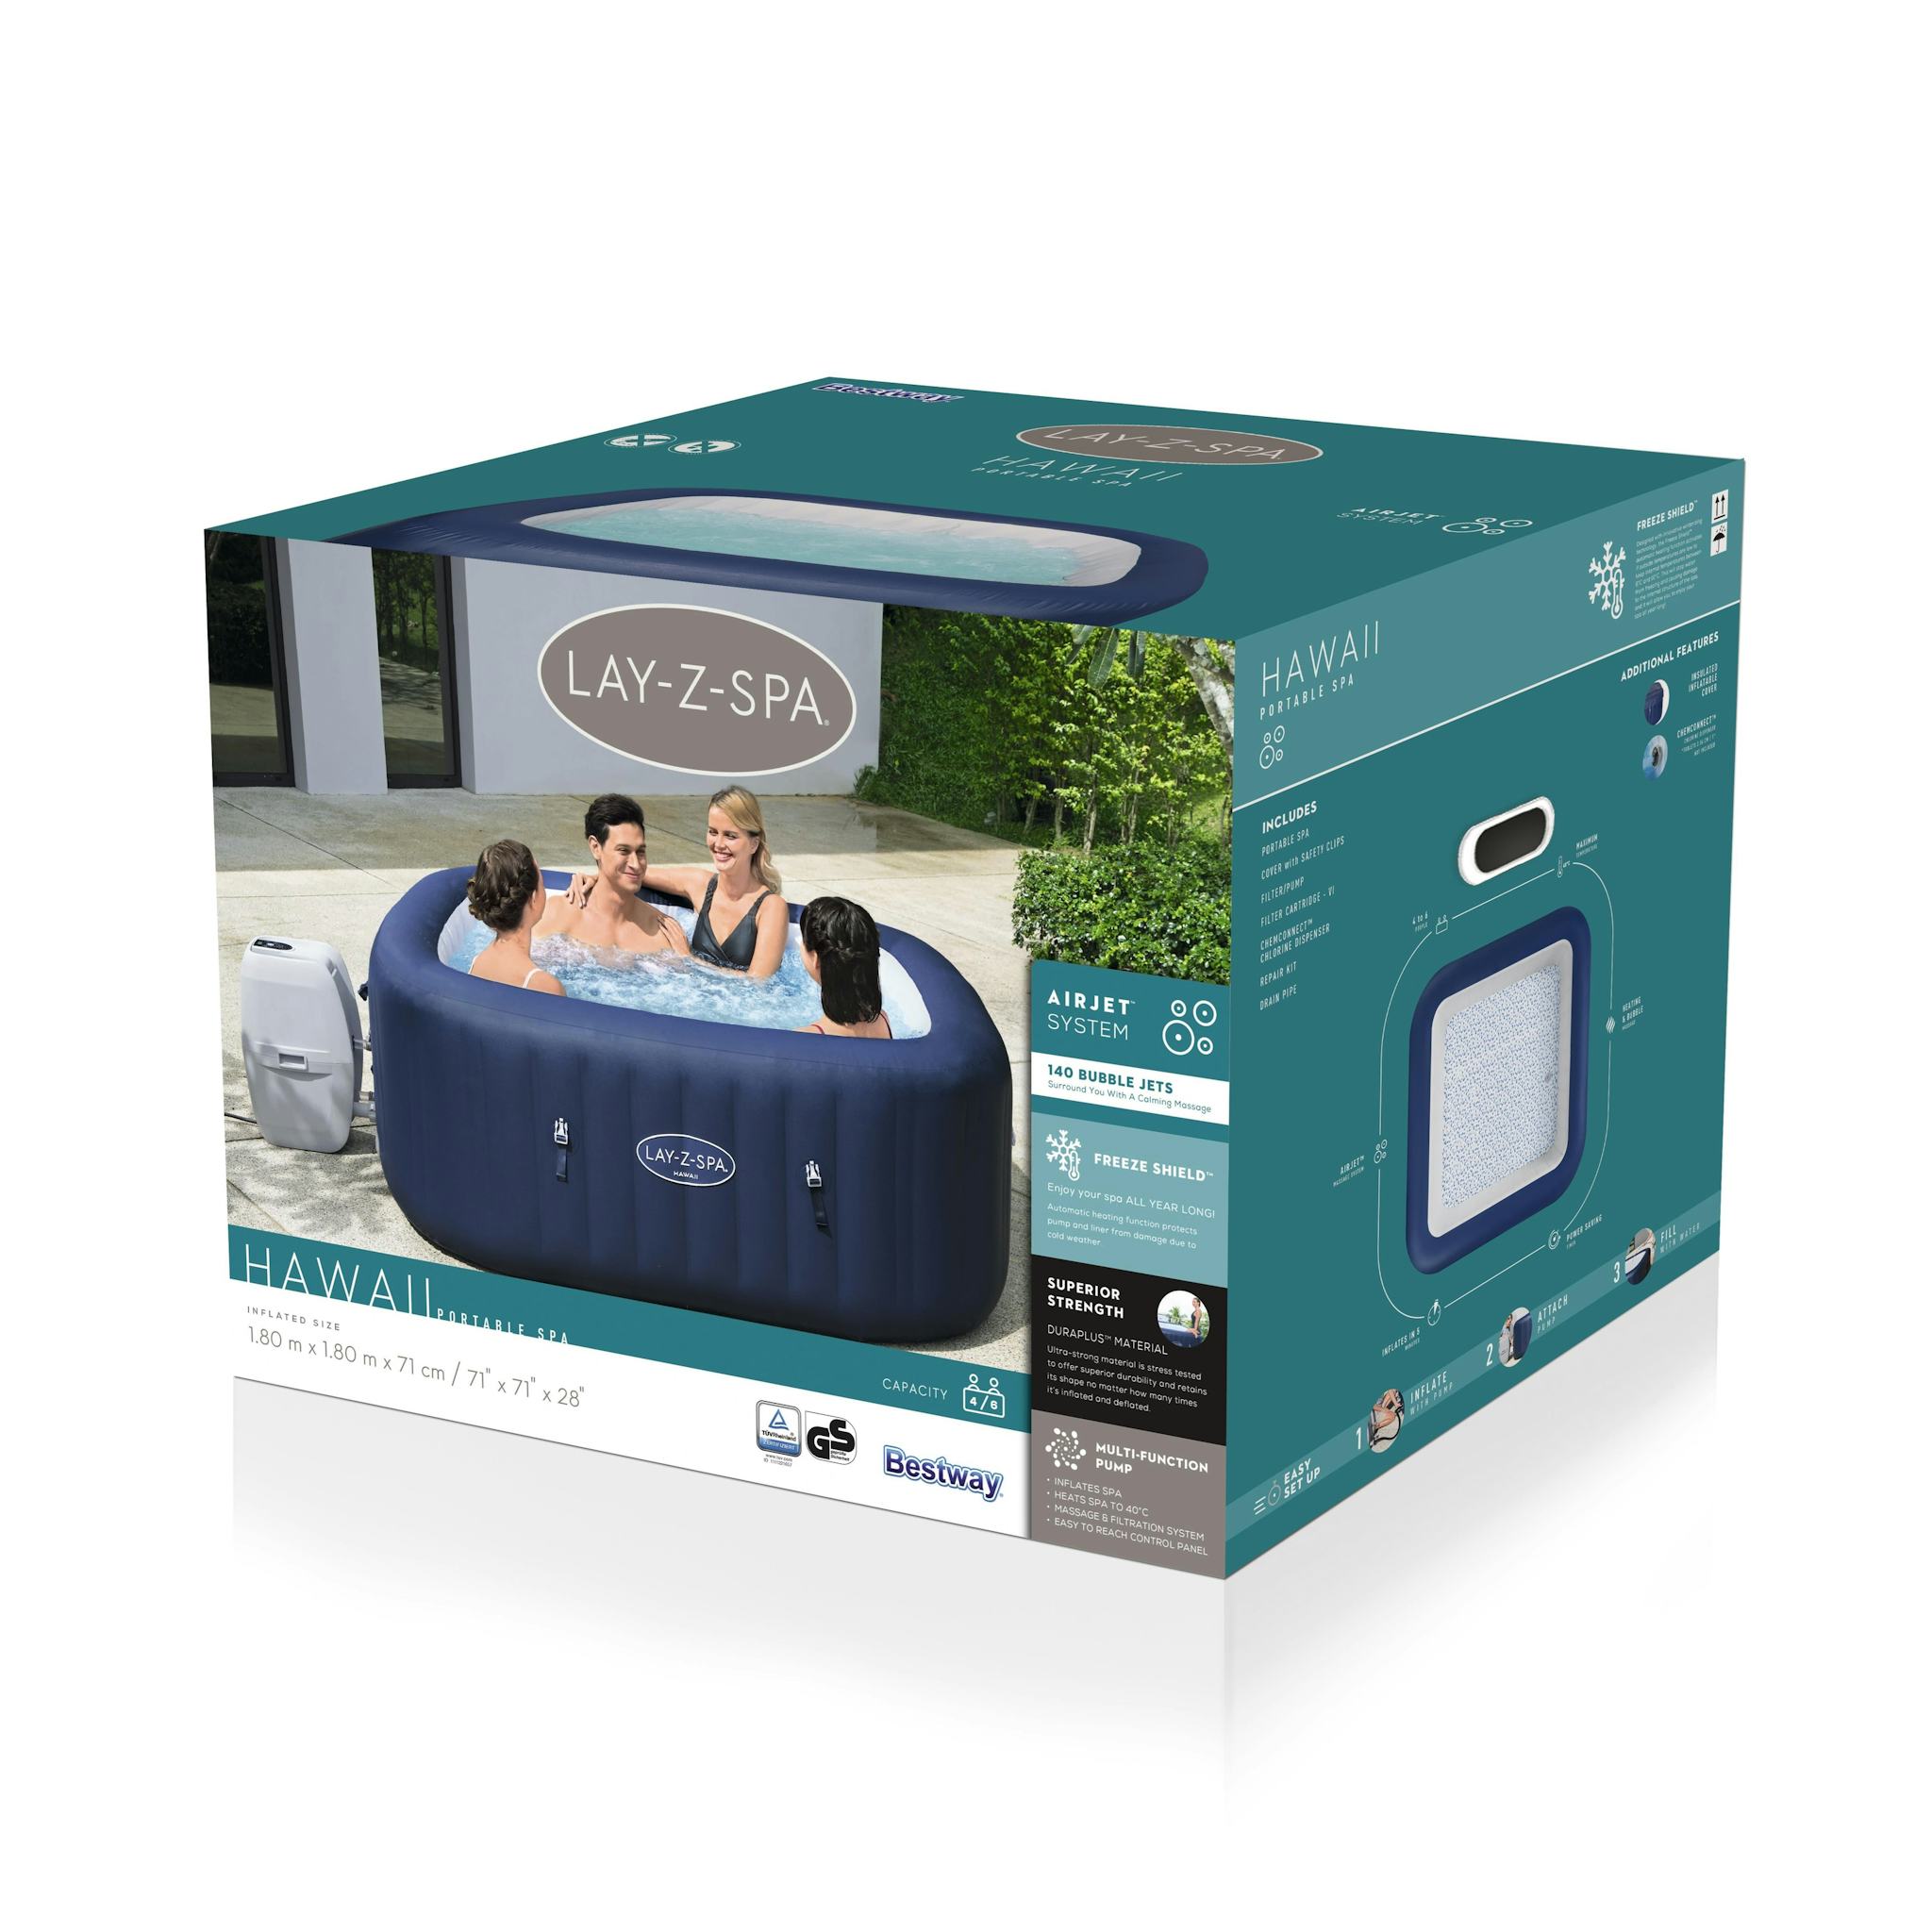 Spas Gonflables Spa gonflable carré Lay-Z-Spa Hawaii Airjet™ 4 - 6 personnes Bestway 10